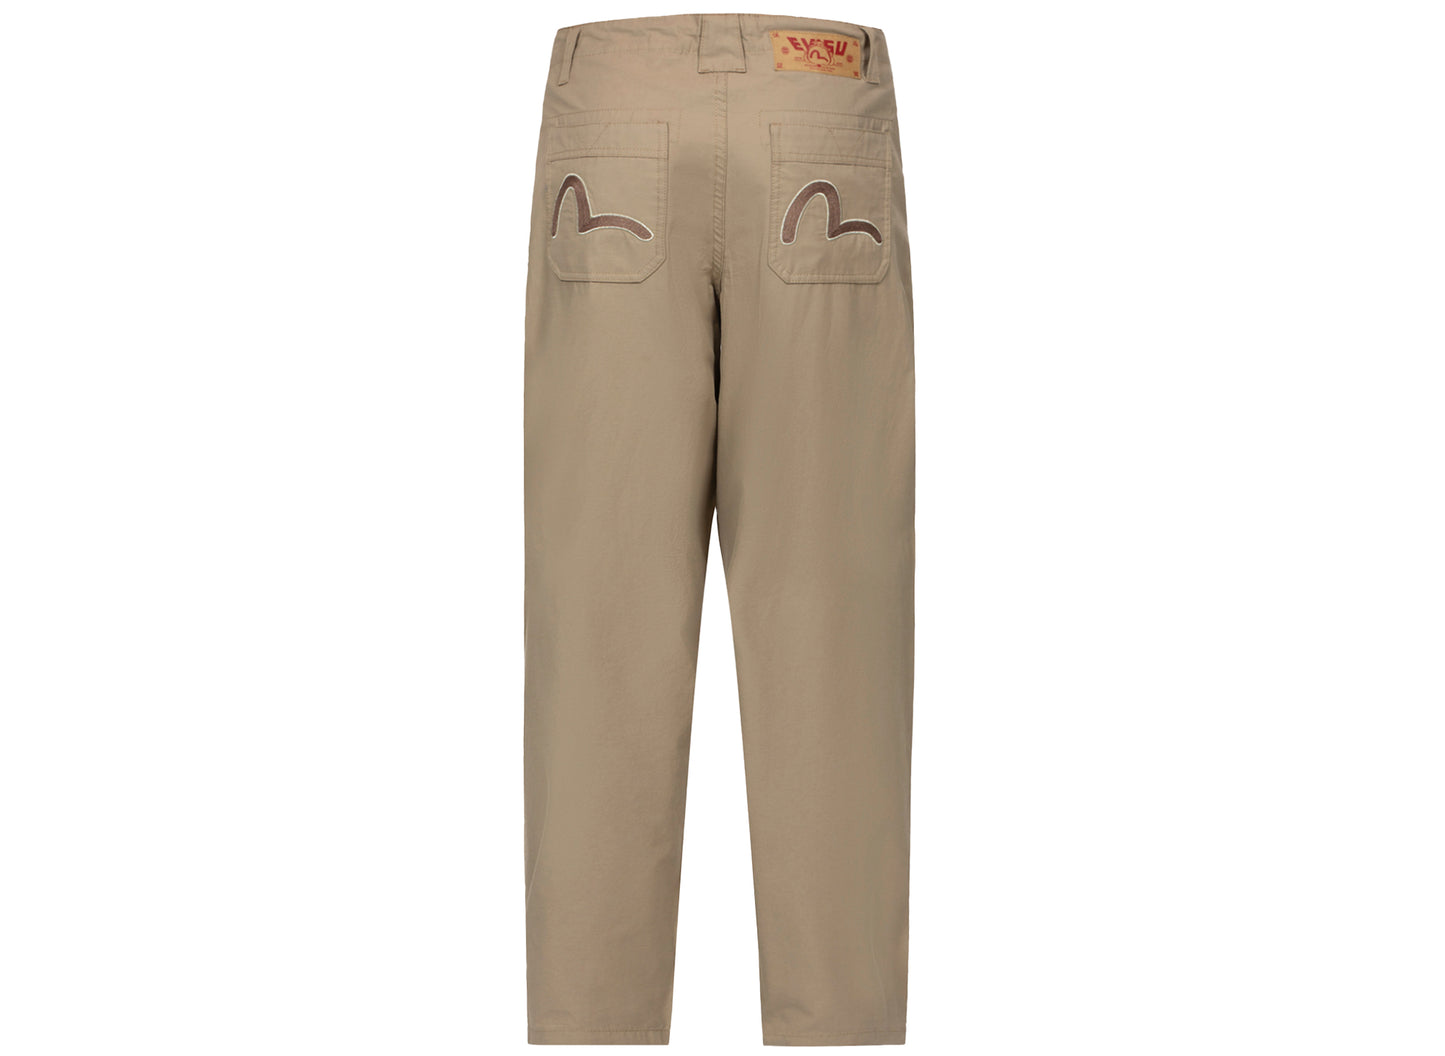 Evisu Seagull Embroidered Baggy Pants in Beige xld